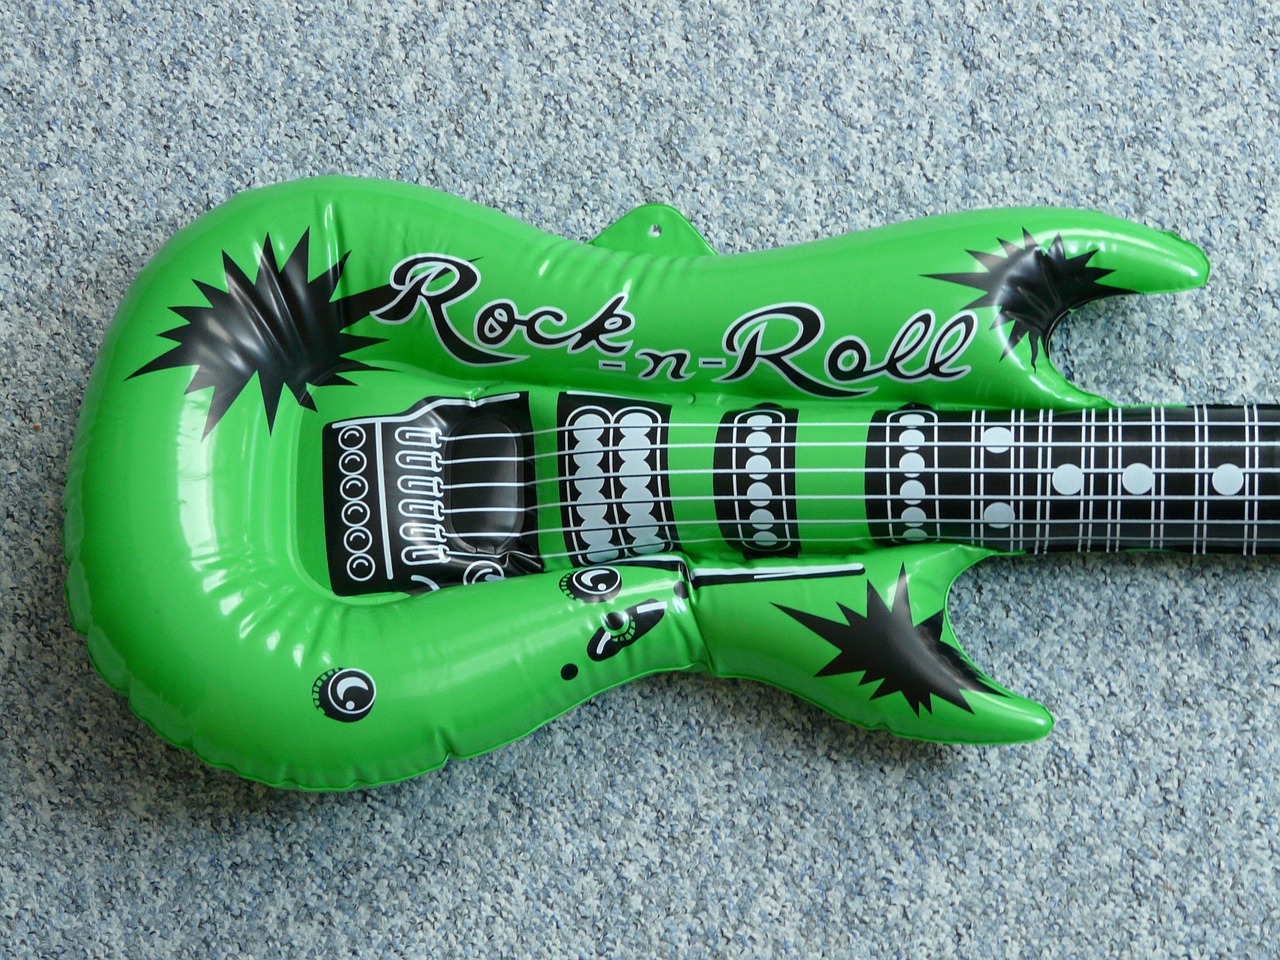 guitar inflatable bloat free photo